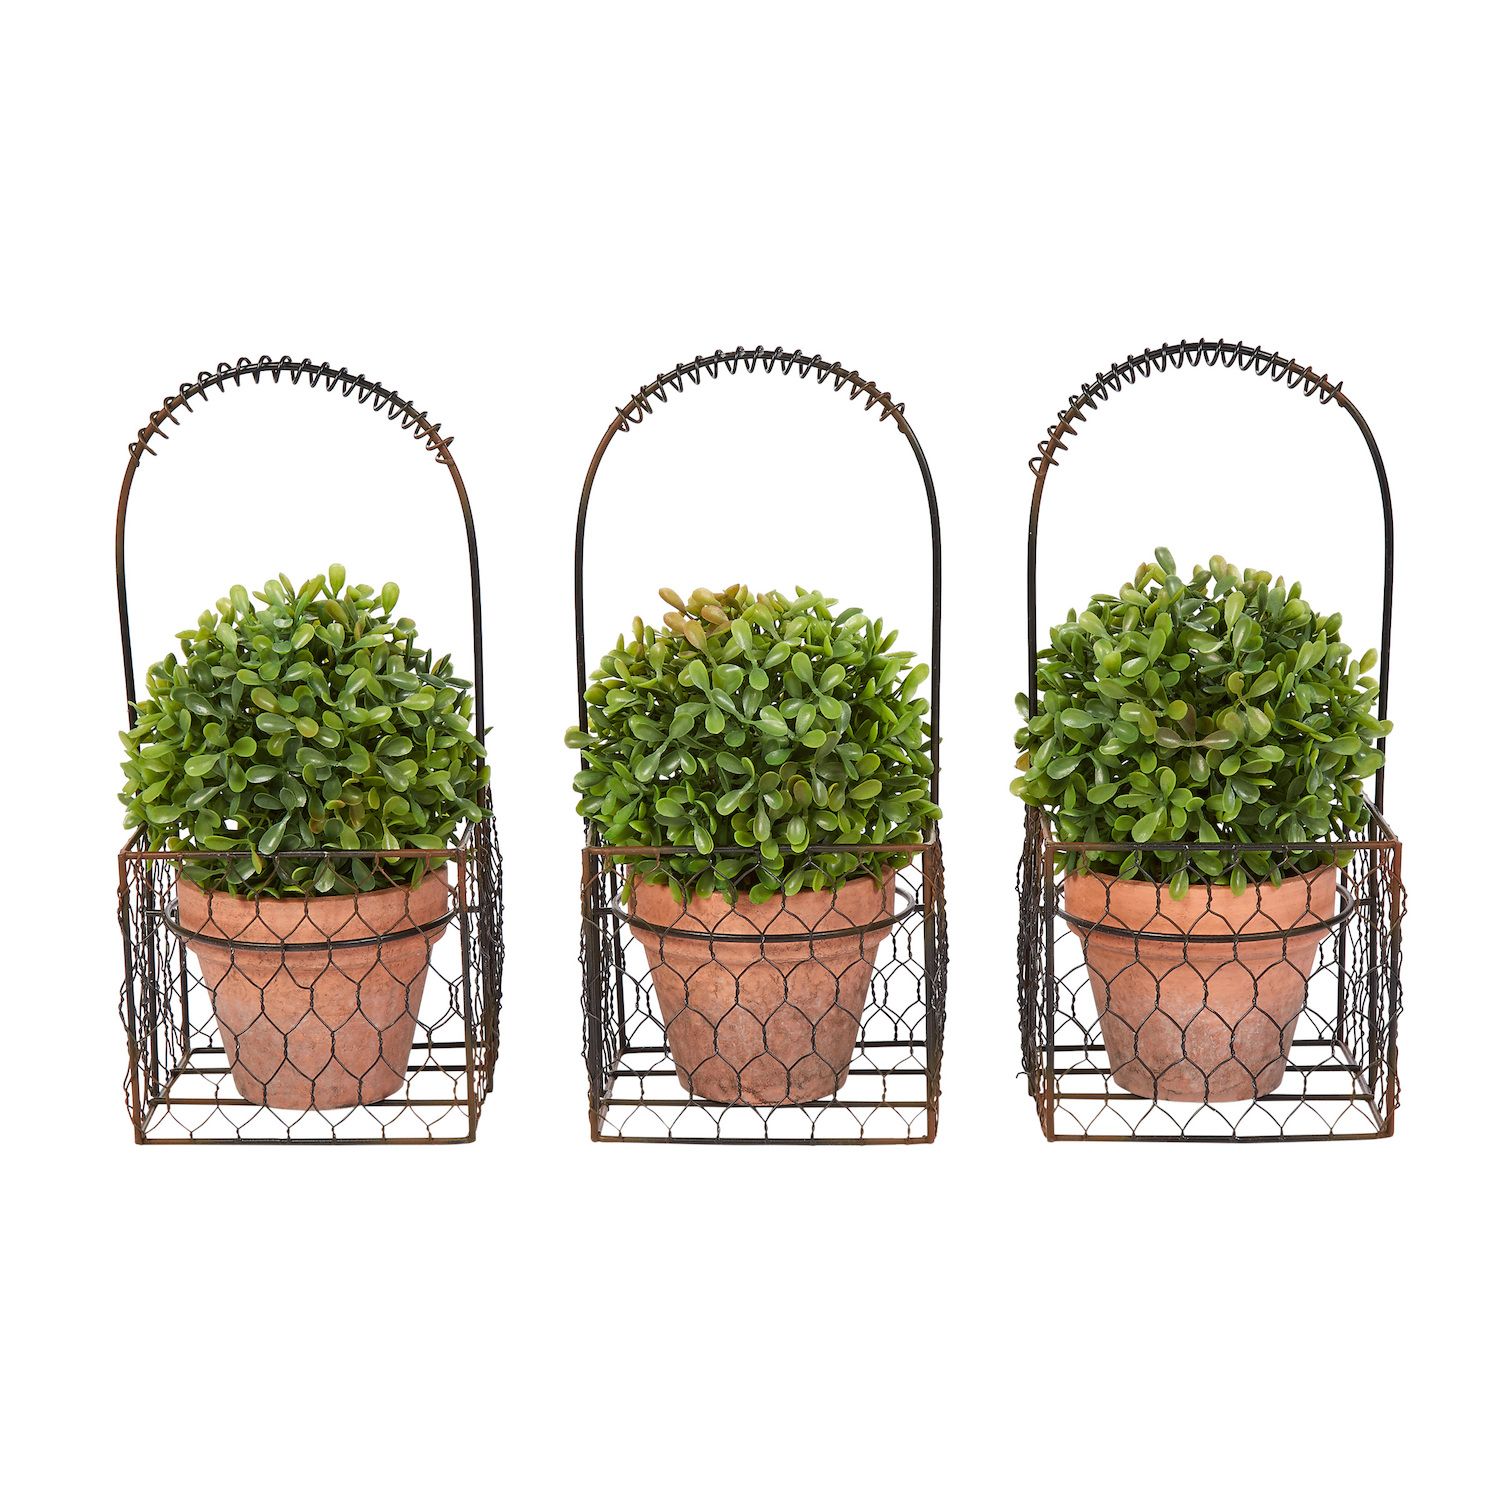 Image for Hastings Home Faux Boxwood Table Decor 3-piece Set at Kohl's.